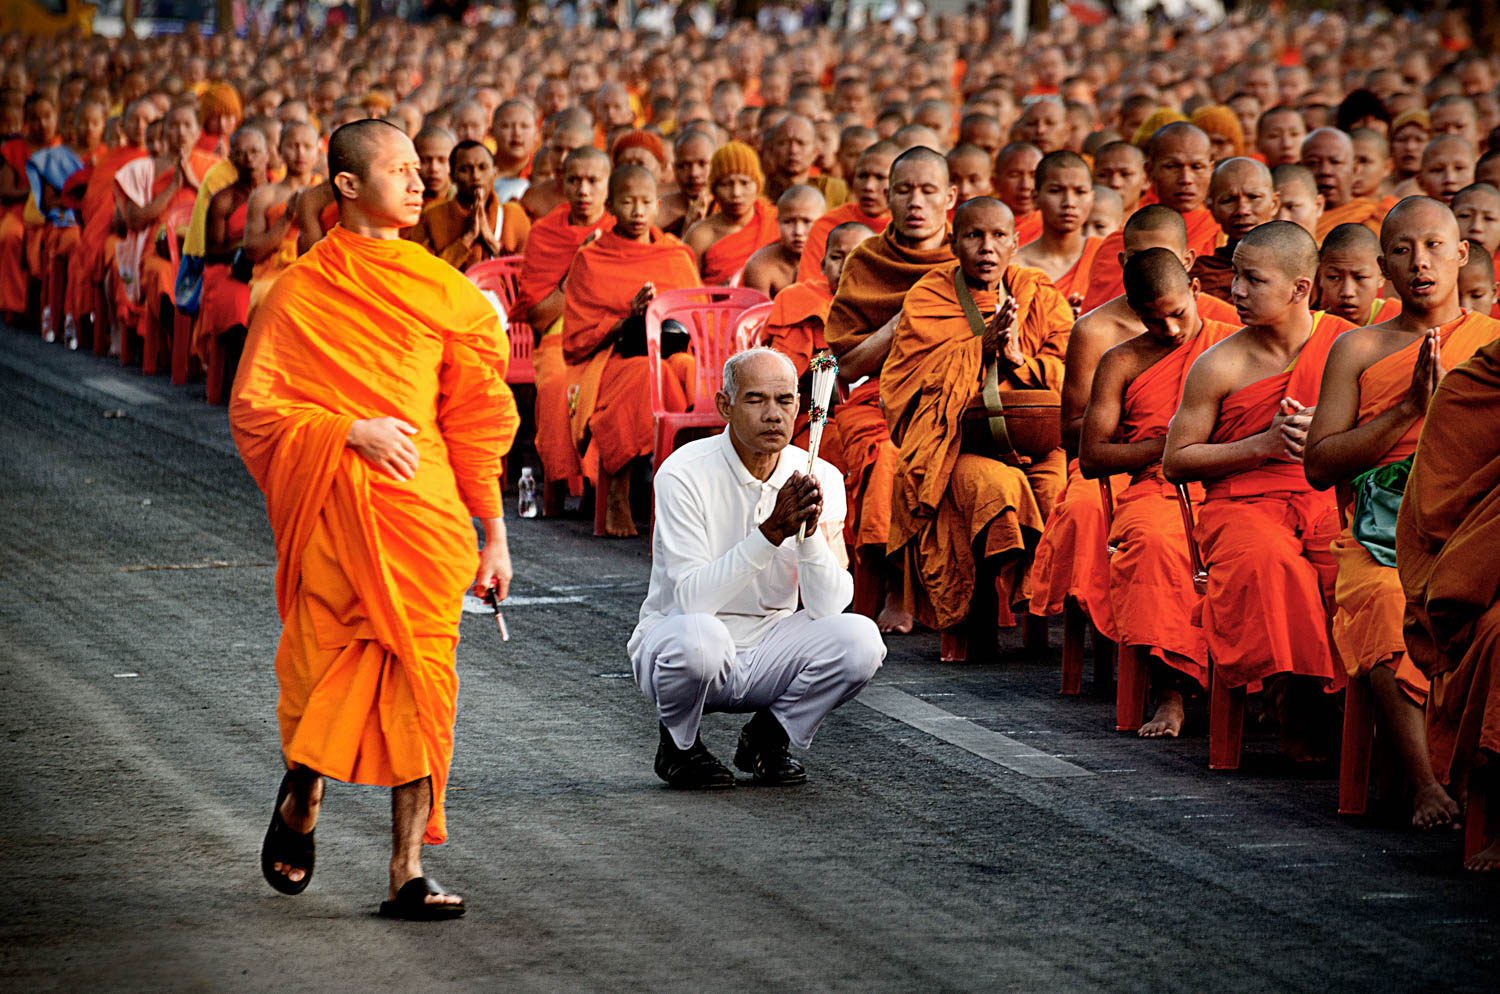 The 12,999 Monk Alms Procession in Chiang Mai